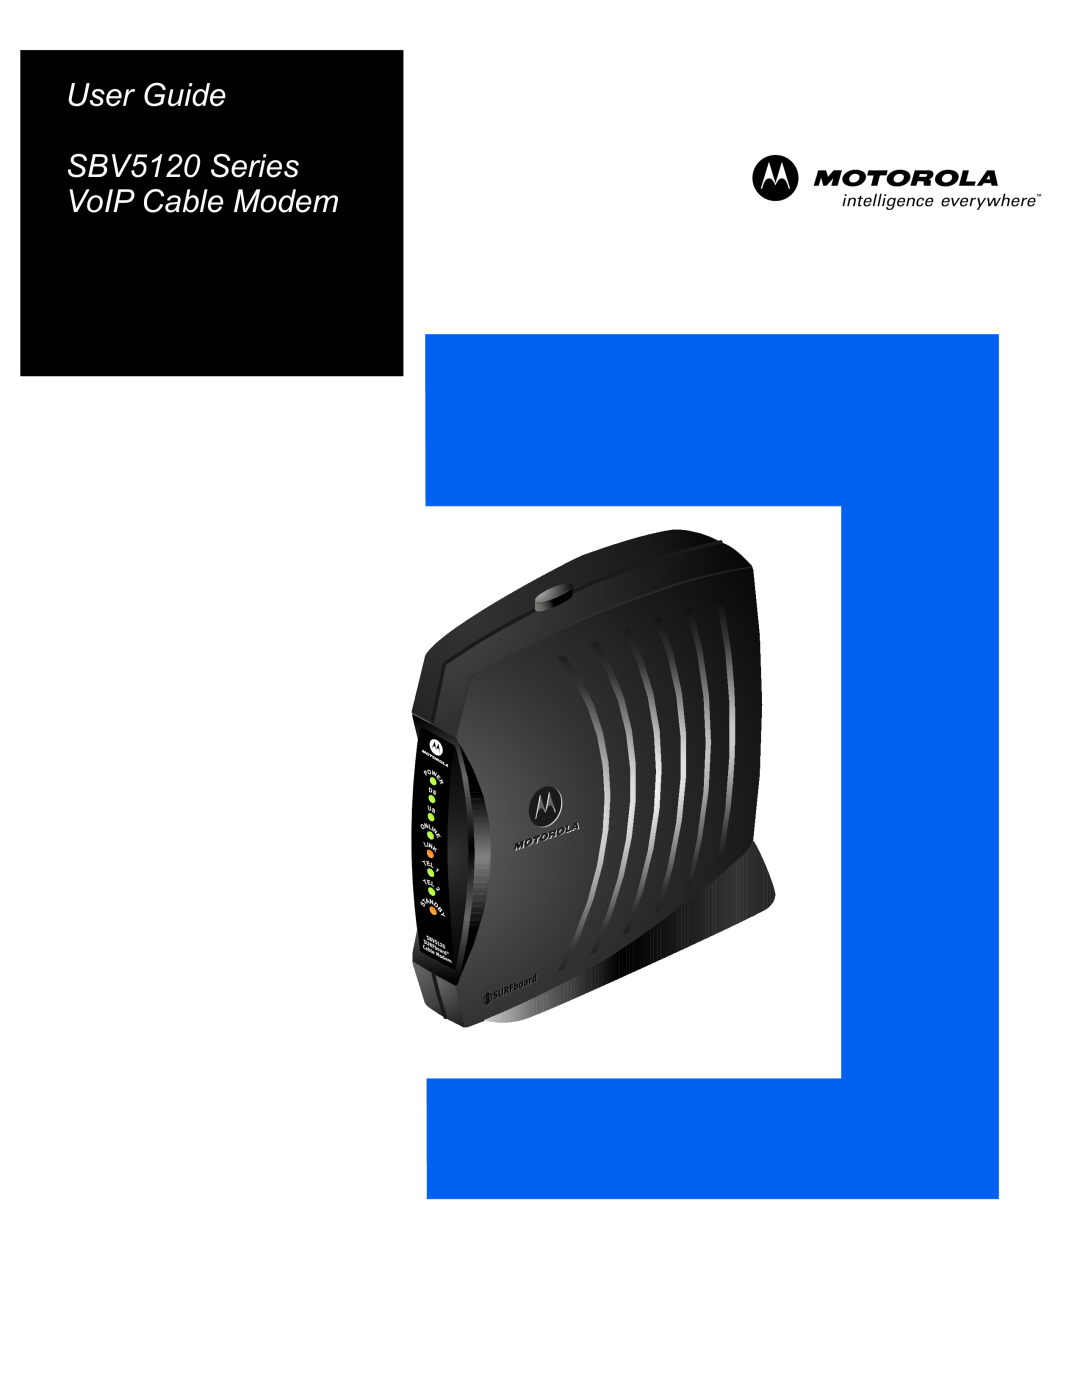 Motorola manual User Guide SURFboard SBV5120 VoIP Cable Modem 